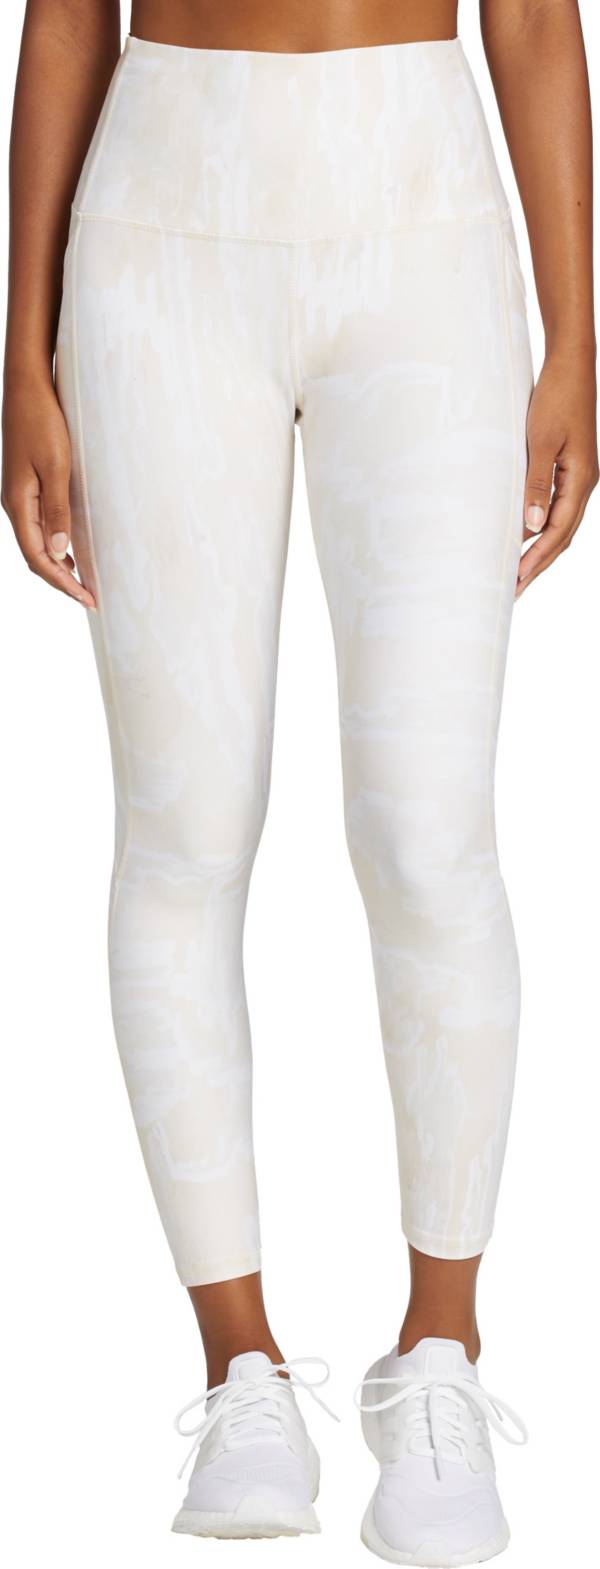 DSG X TWITCH + ALLISON Women's Ultra High Rise Tights product image